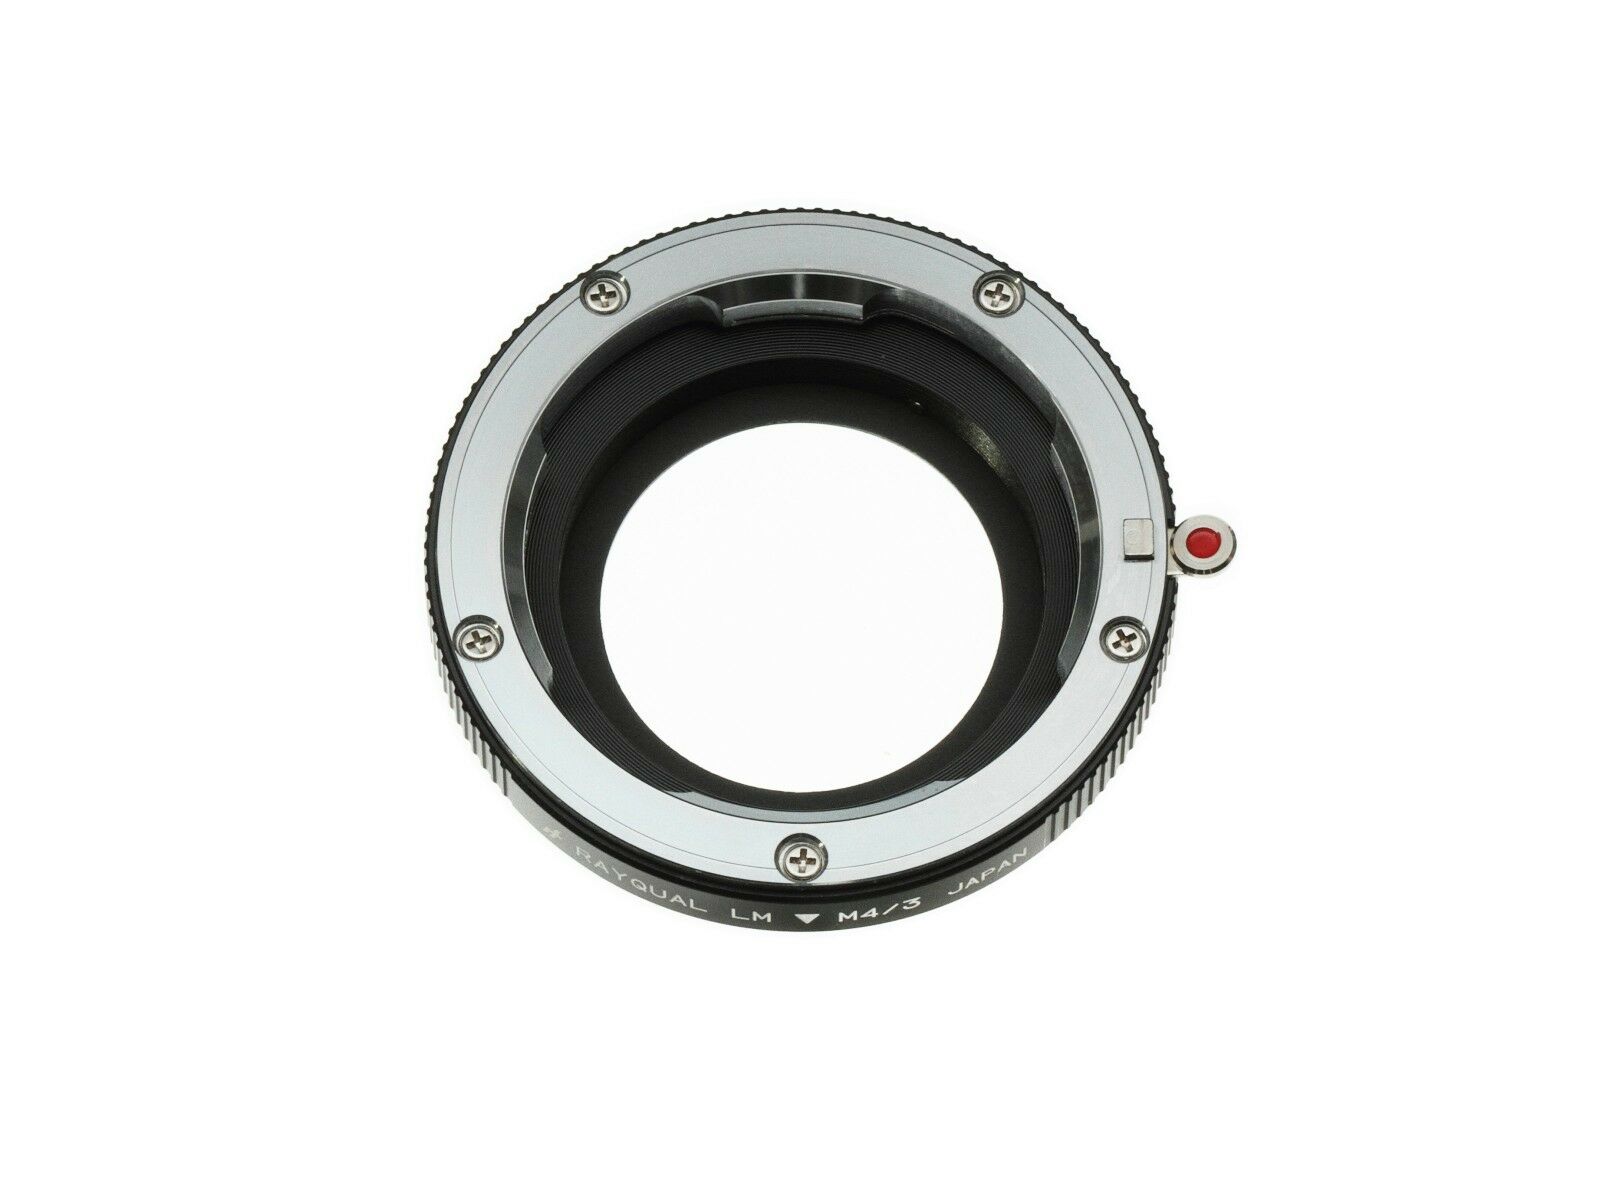 Rayqual Lens Mount Adapter for Leica M lens to Micro Four Thirds Mount  Camera LM-MF